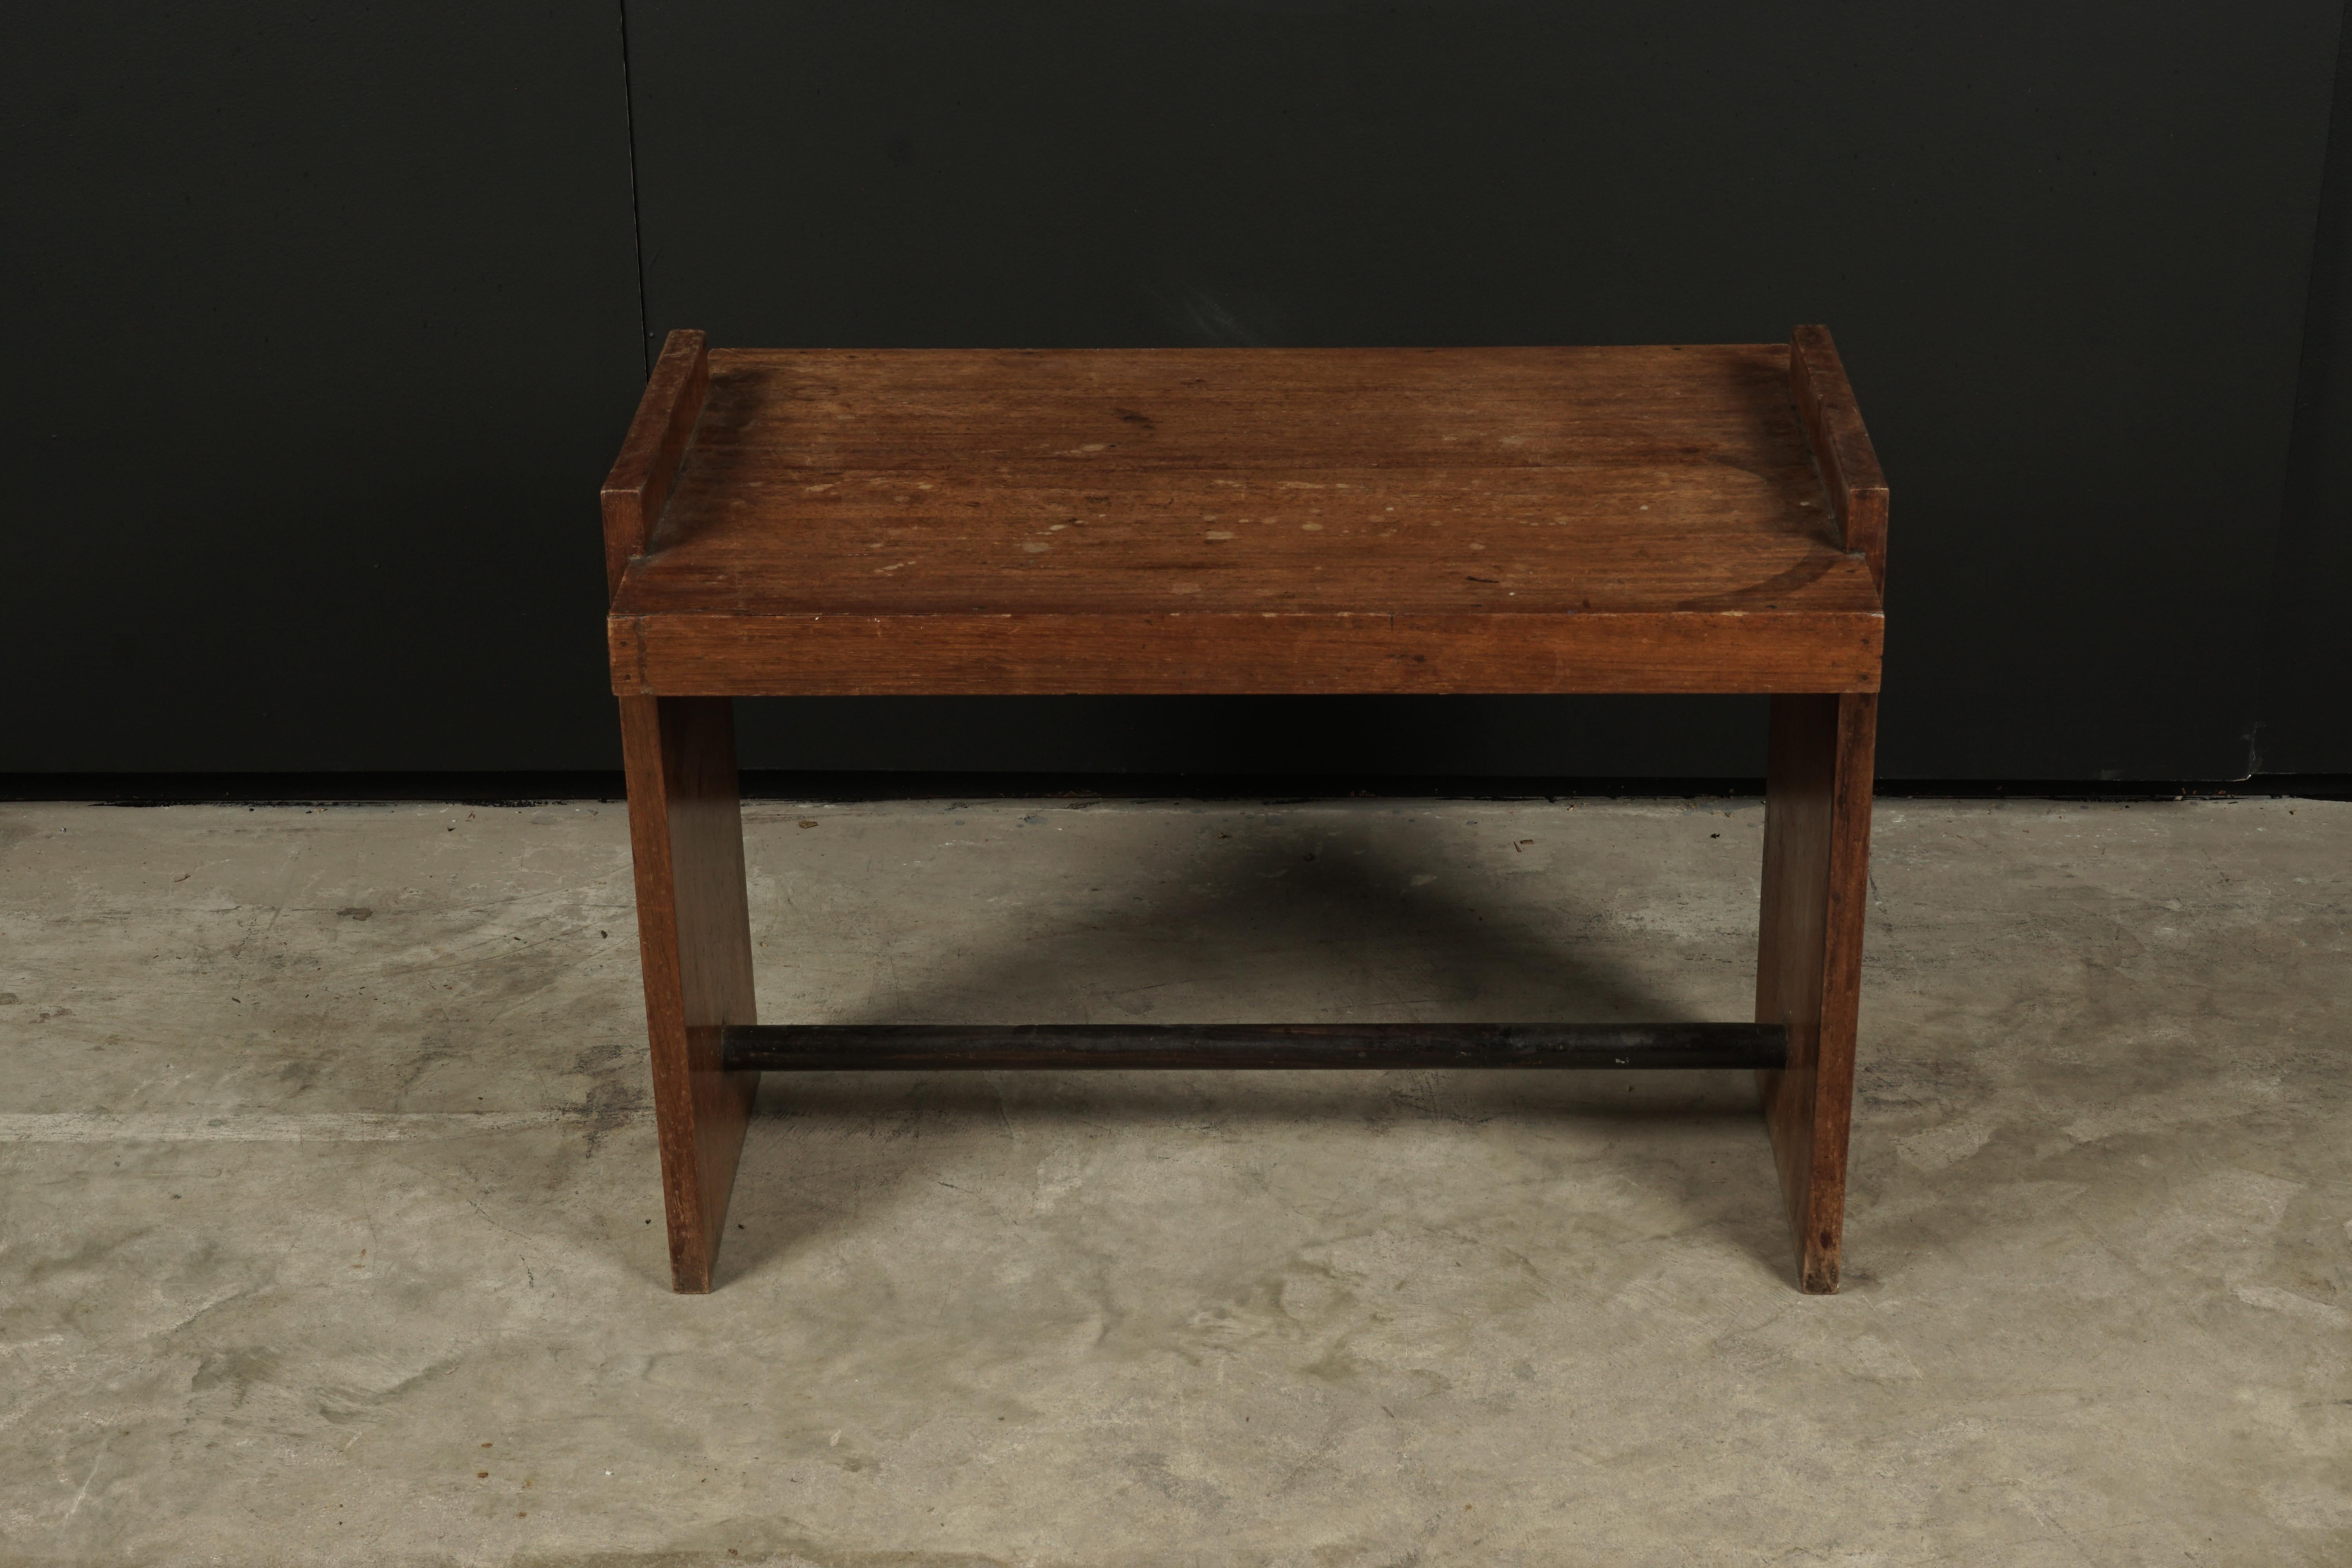 Midcentury side table from France, circa 1960. Light patina and wear.